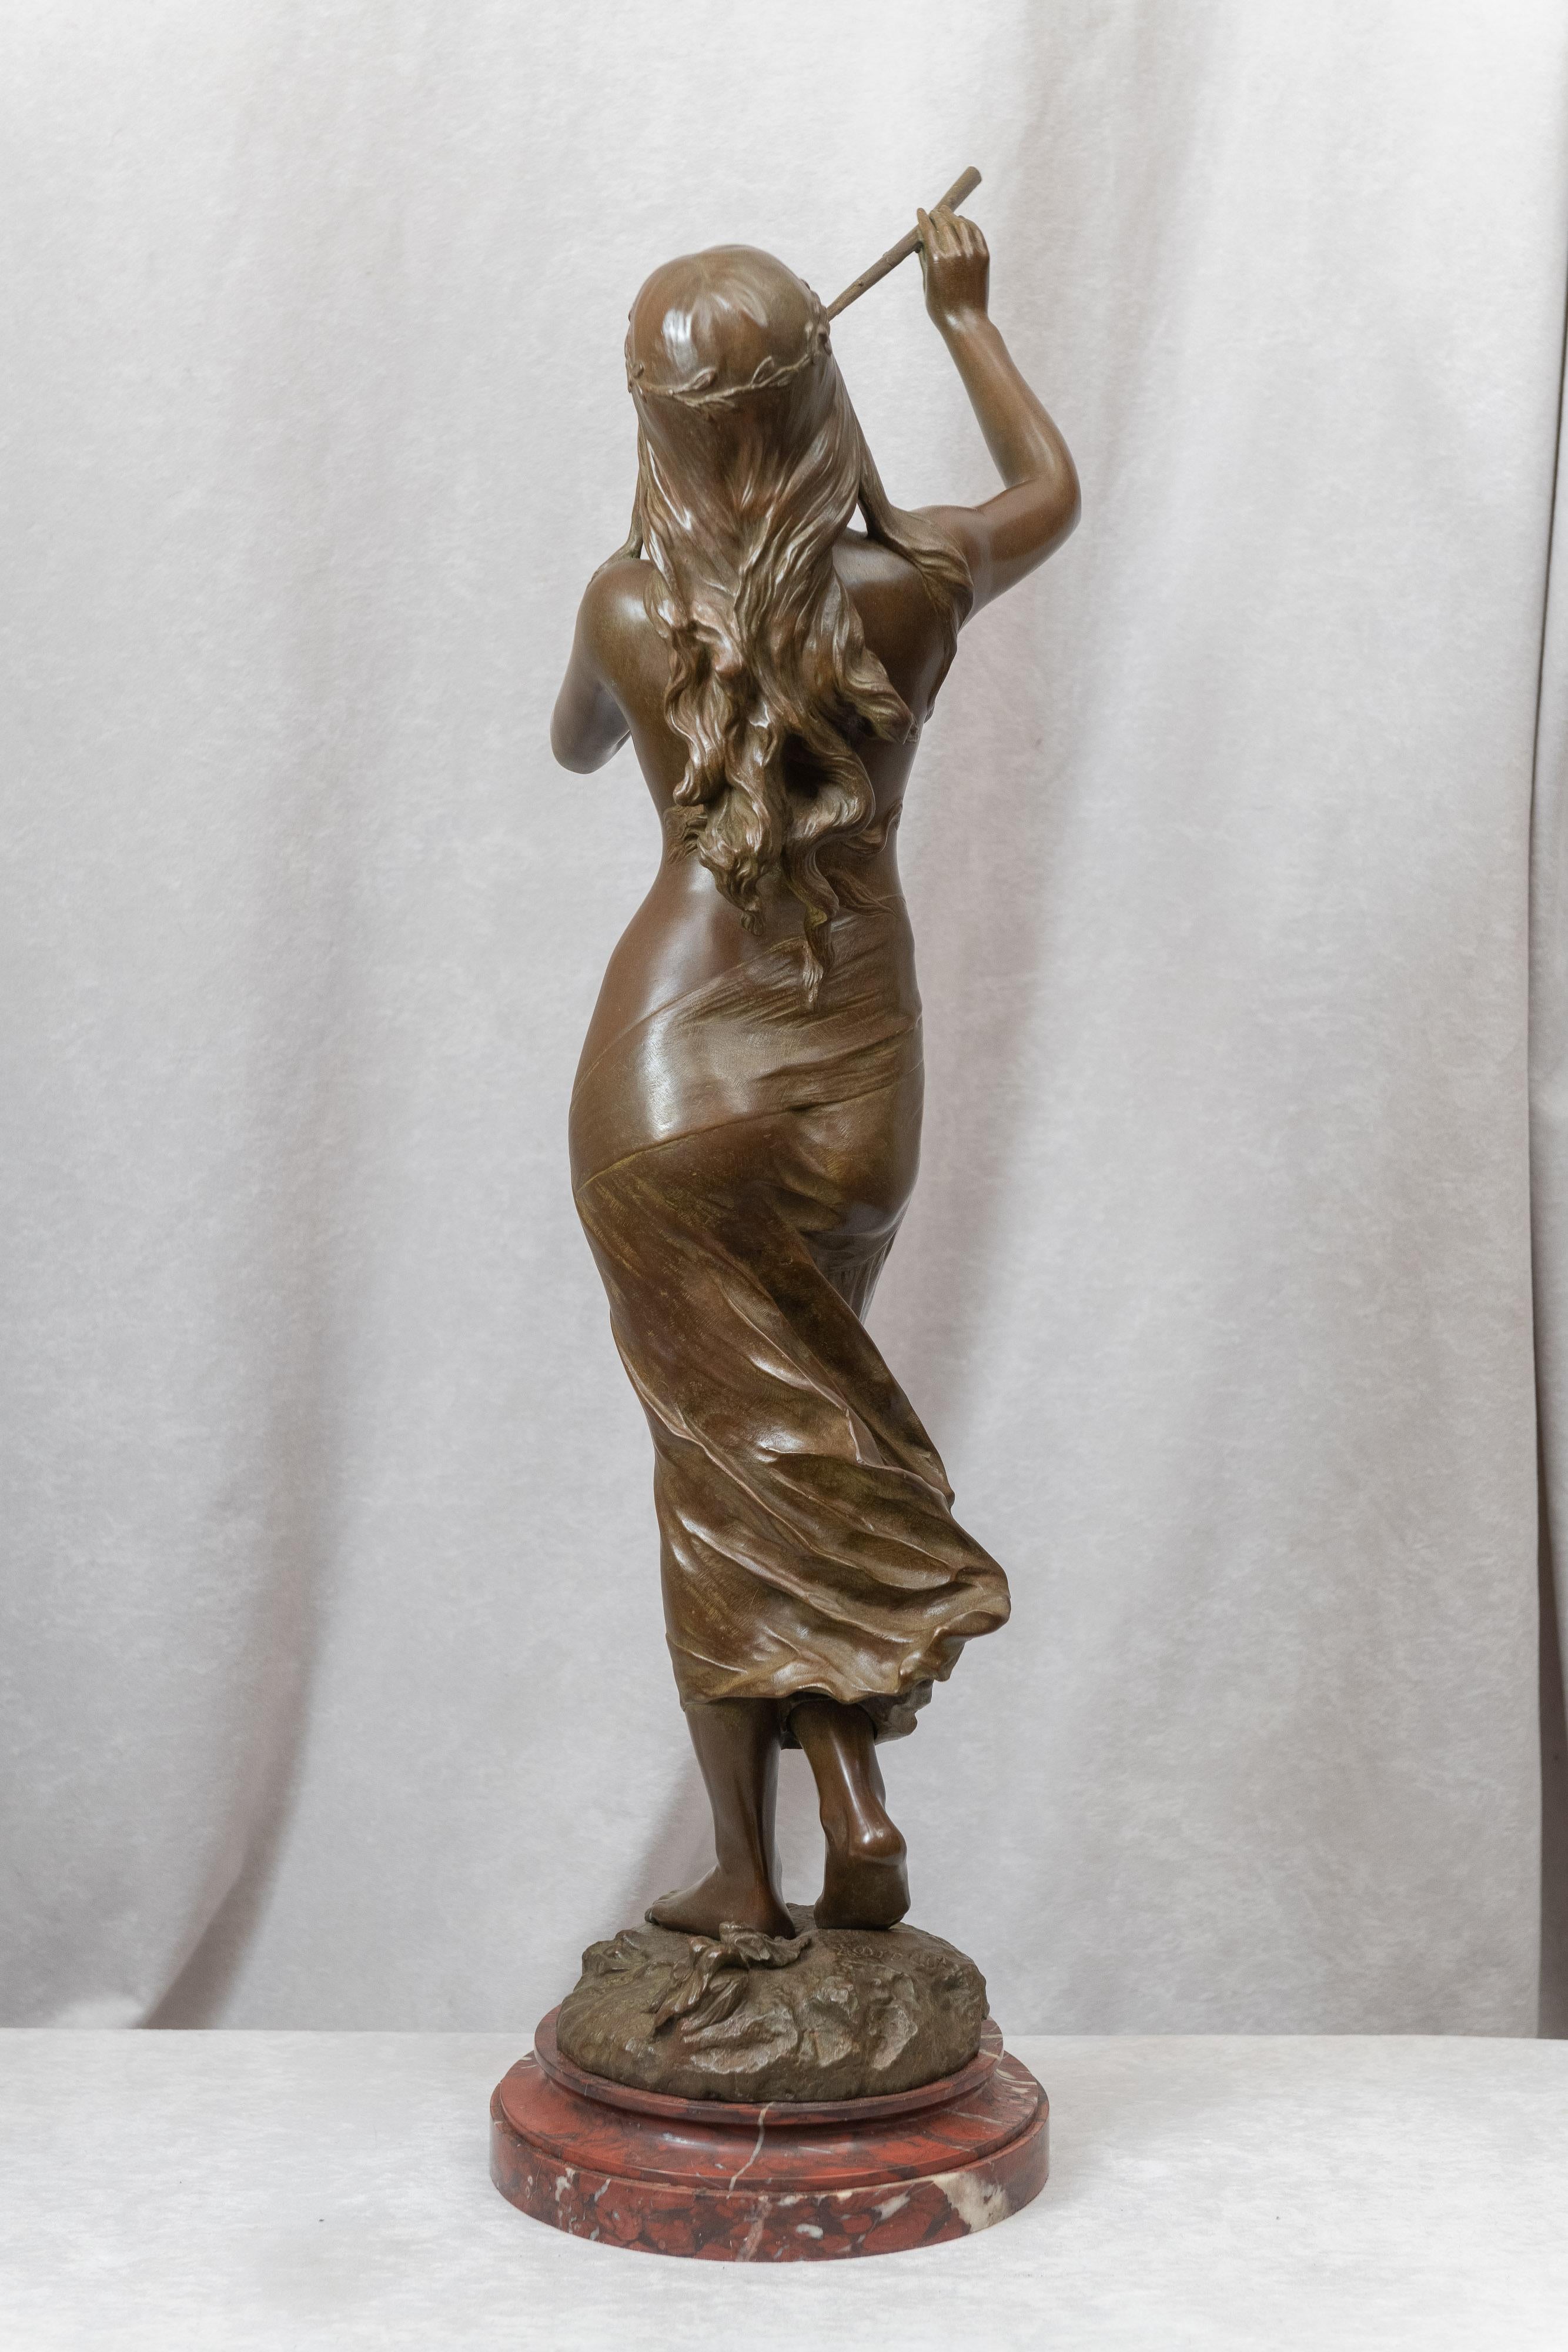 Large French Art Nouveau Bronze of a Partially Nude Maiden, Artist signed Drouot 1